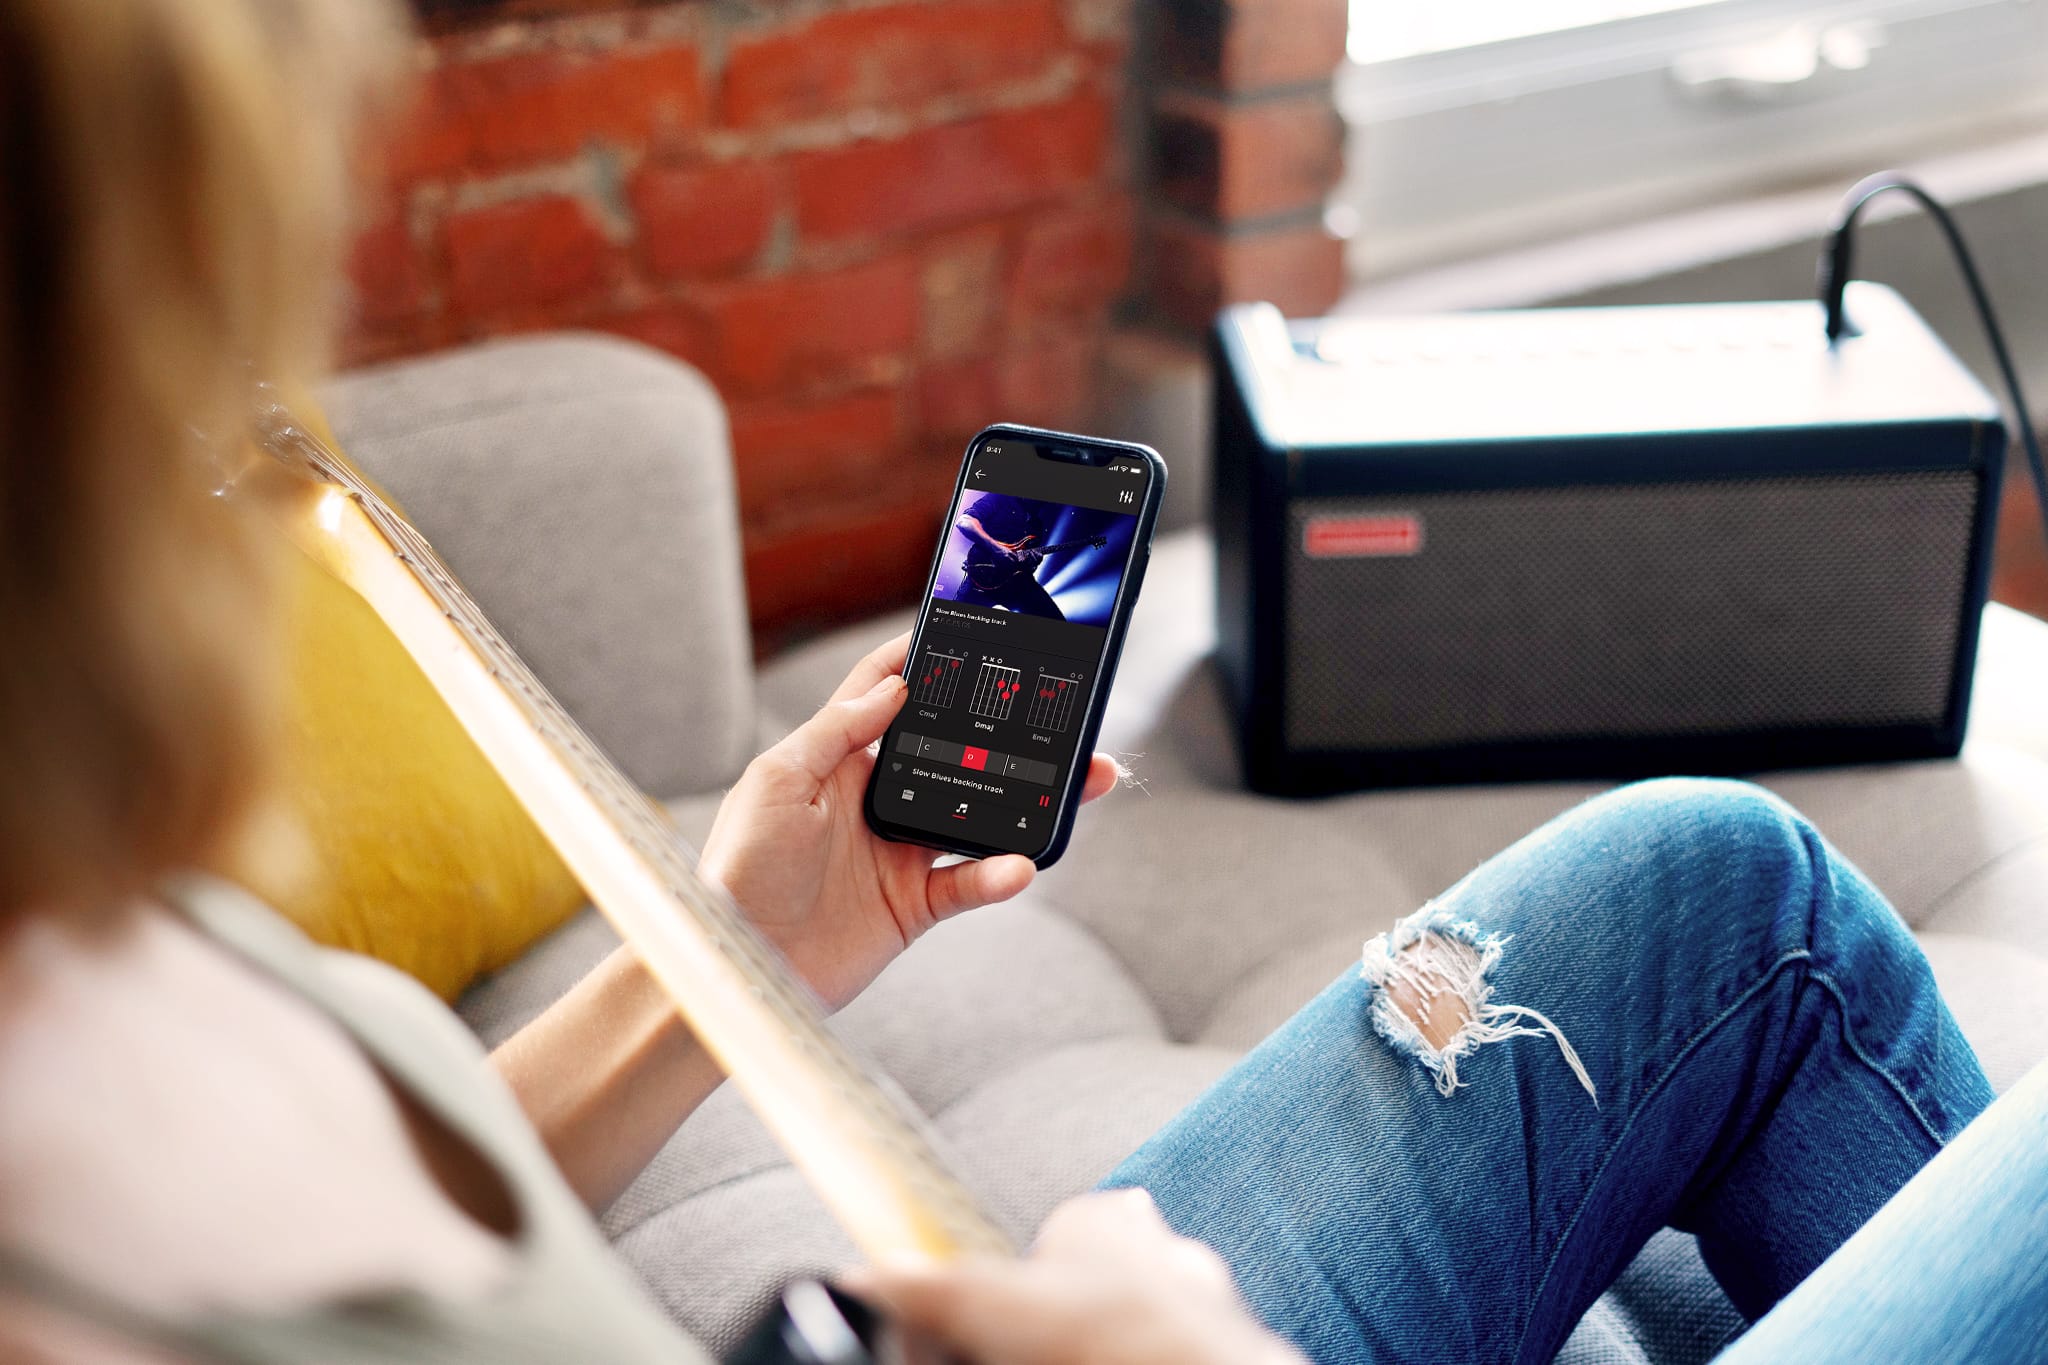 The Positive Grid Spark is a versatile smart amp perfect for guitarists stuck at home